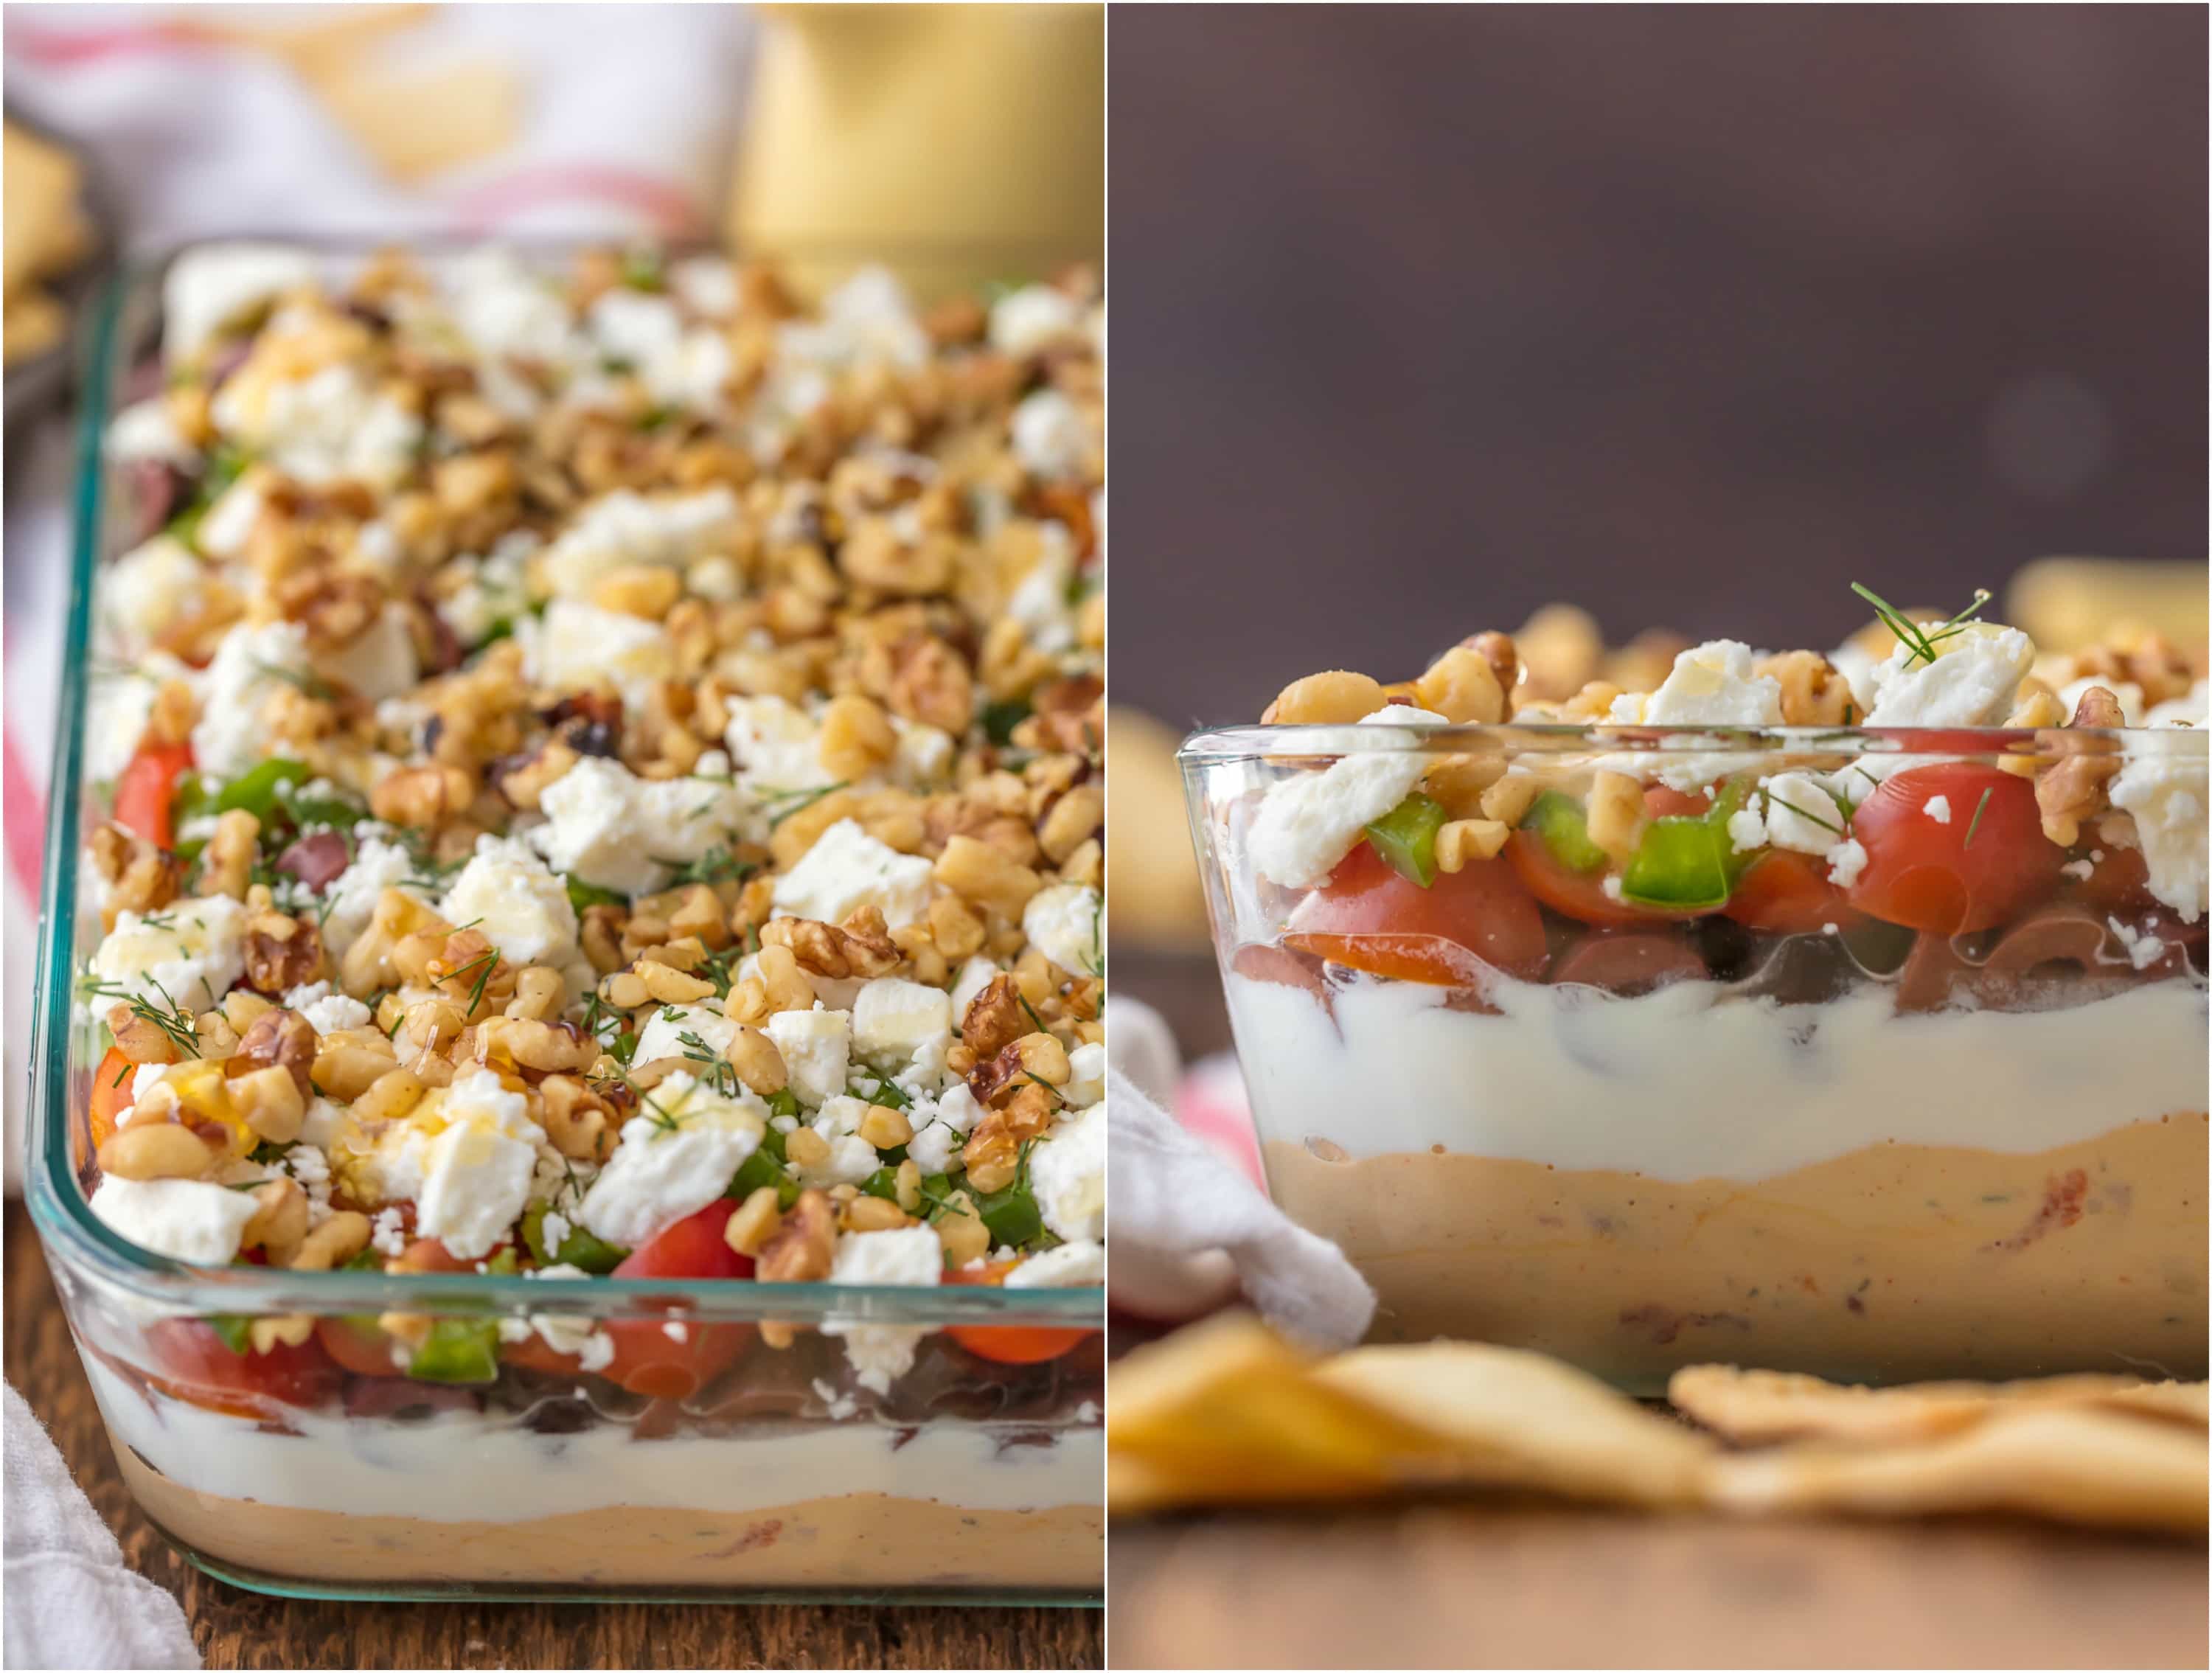 GREEK 7 LAYER DIP is a fun twist on a classic appetizer. This delicious dip is the perfect sharable app for Christmas, NYE, or any reason for tailgating. Layers of hummus, greek yogurt, feta, and so much more make it SO addicting!